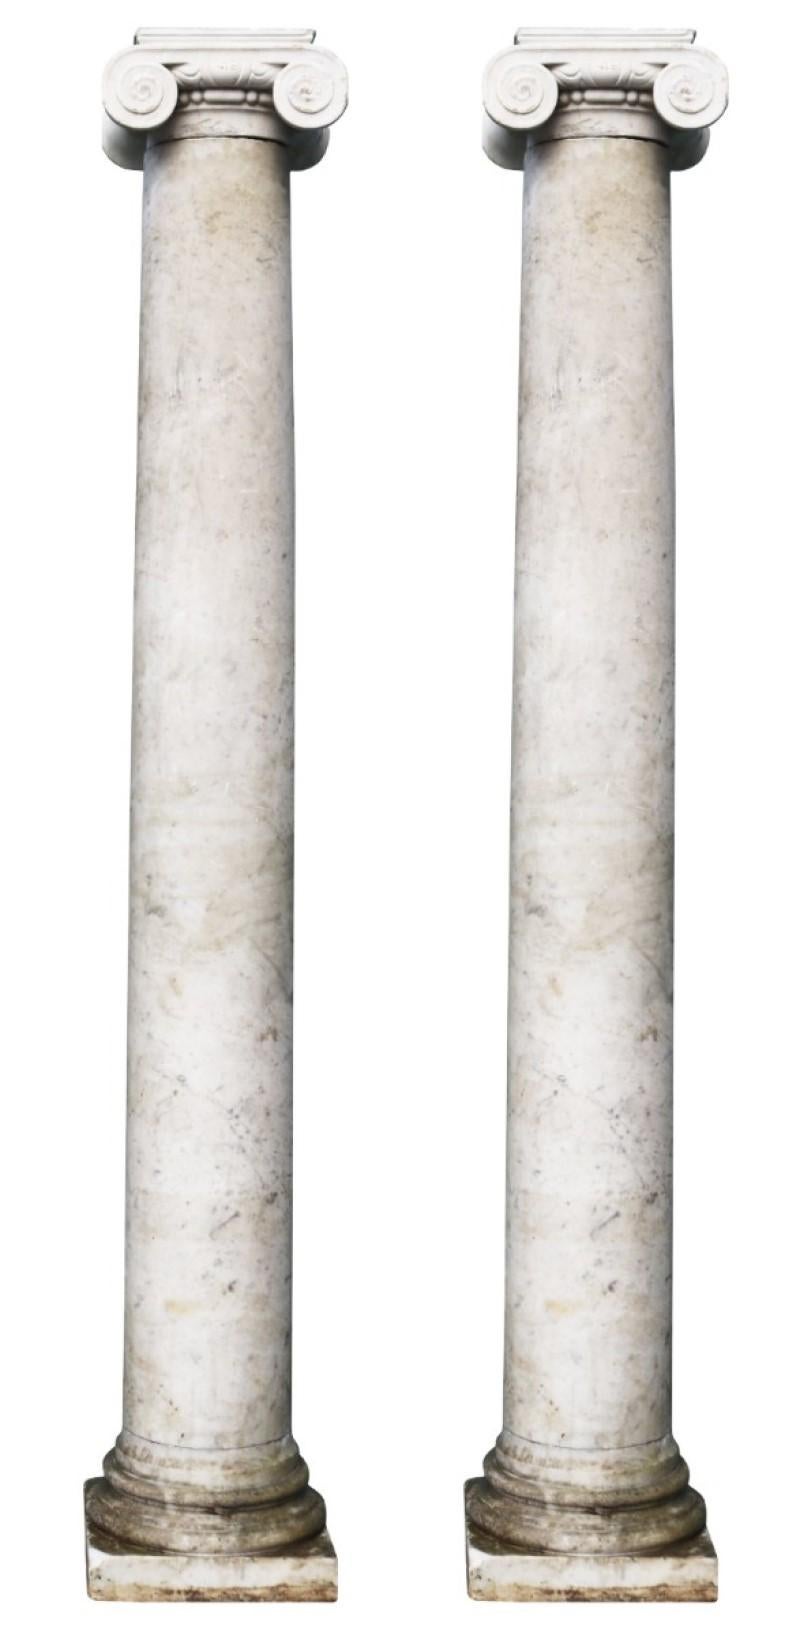 Two lightly veined Ionic order marble columns. These Georgian period columns were reclaimed from a property in Surrey.

Additional dimensions:

Height of columns- 206.5 and 208 cm

Base section 33 x 33 cm

Top section 24 x 23.5 cm.